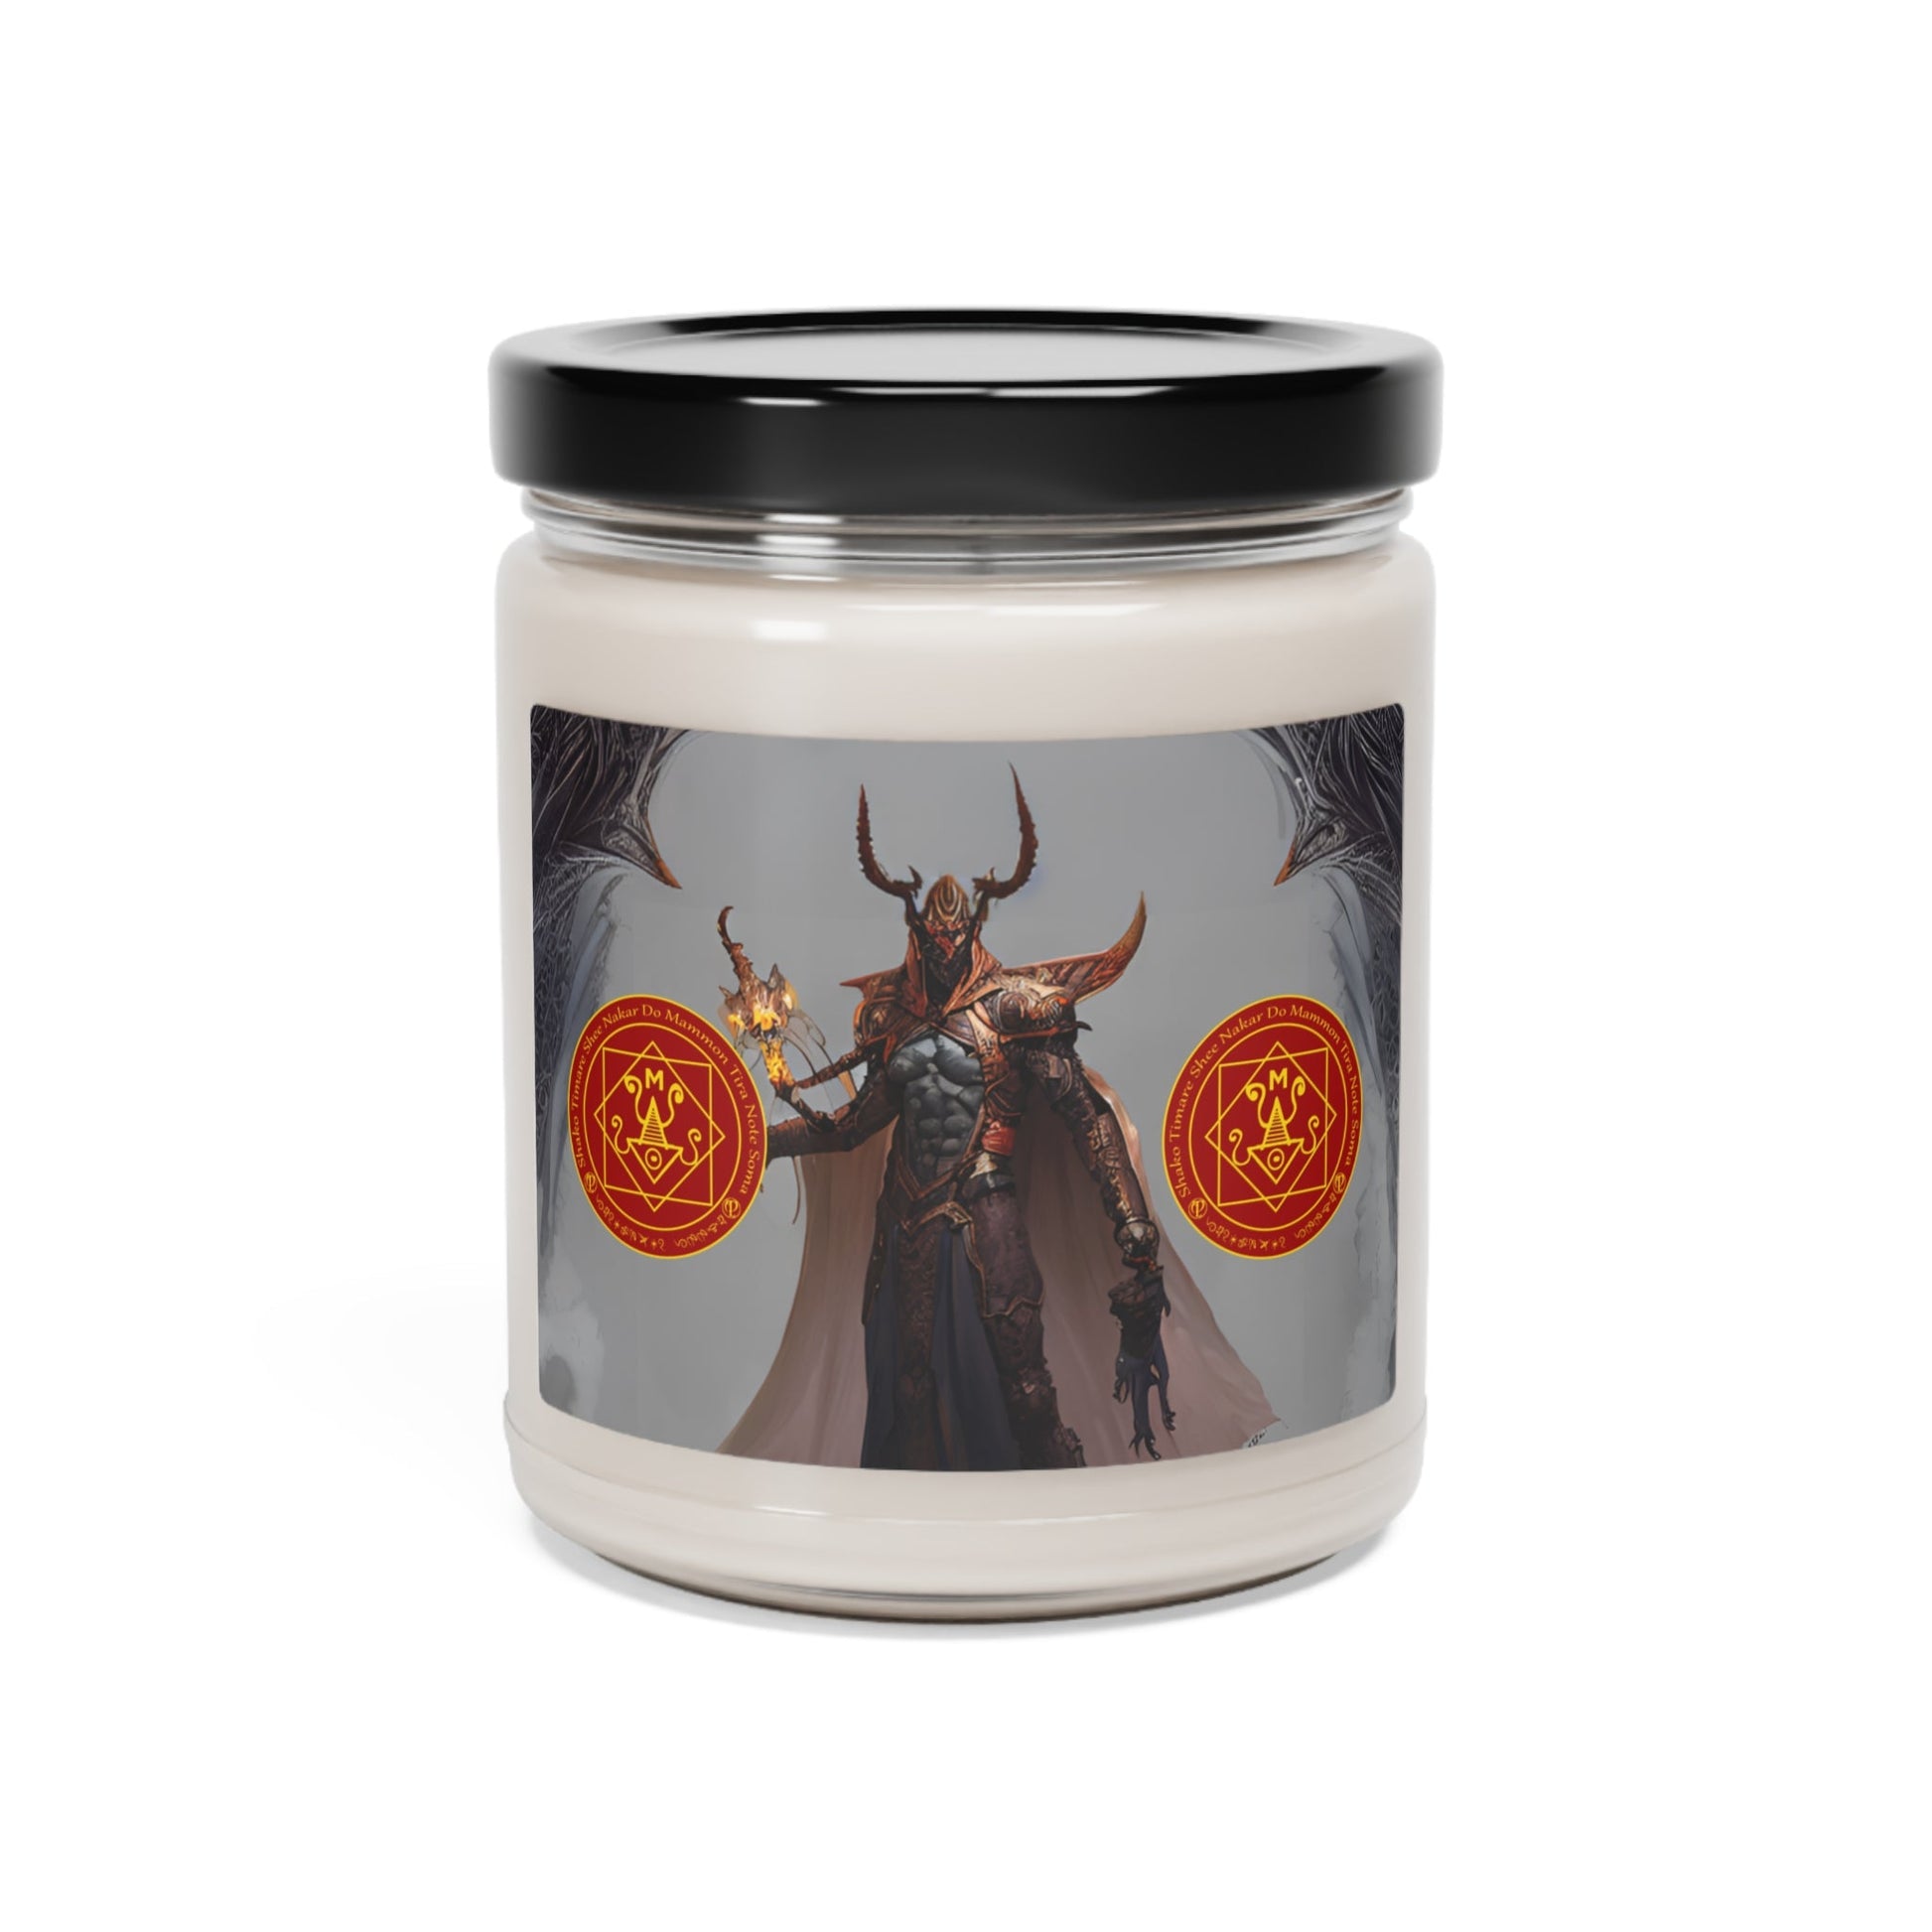 Demon-Mammon-Altar-Scented-Soy-Candle-for-Money-related-offerings-rituals-initiations-or-praying-and-meditation